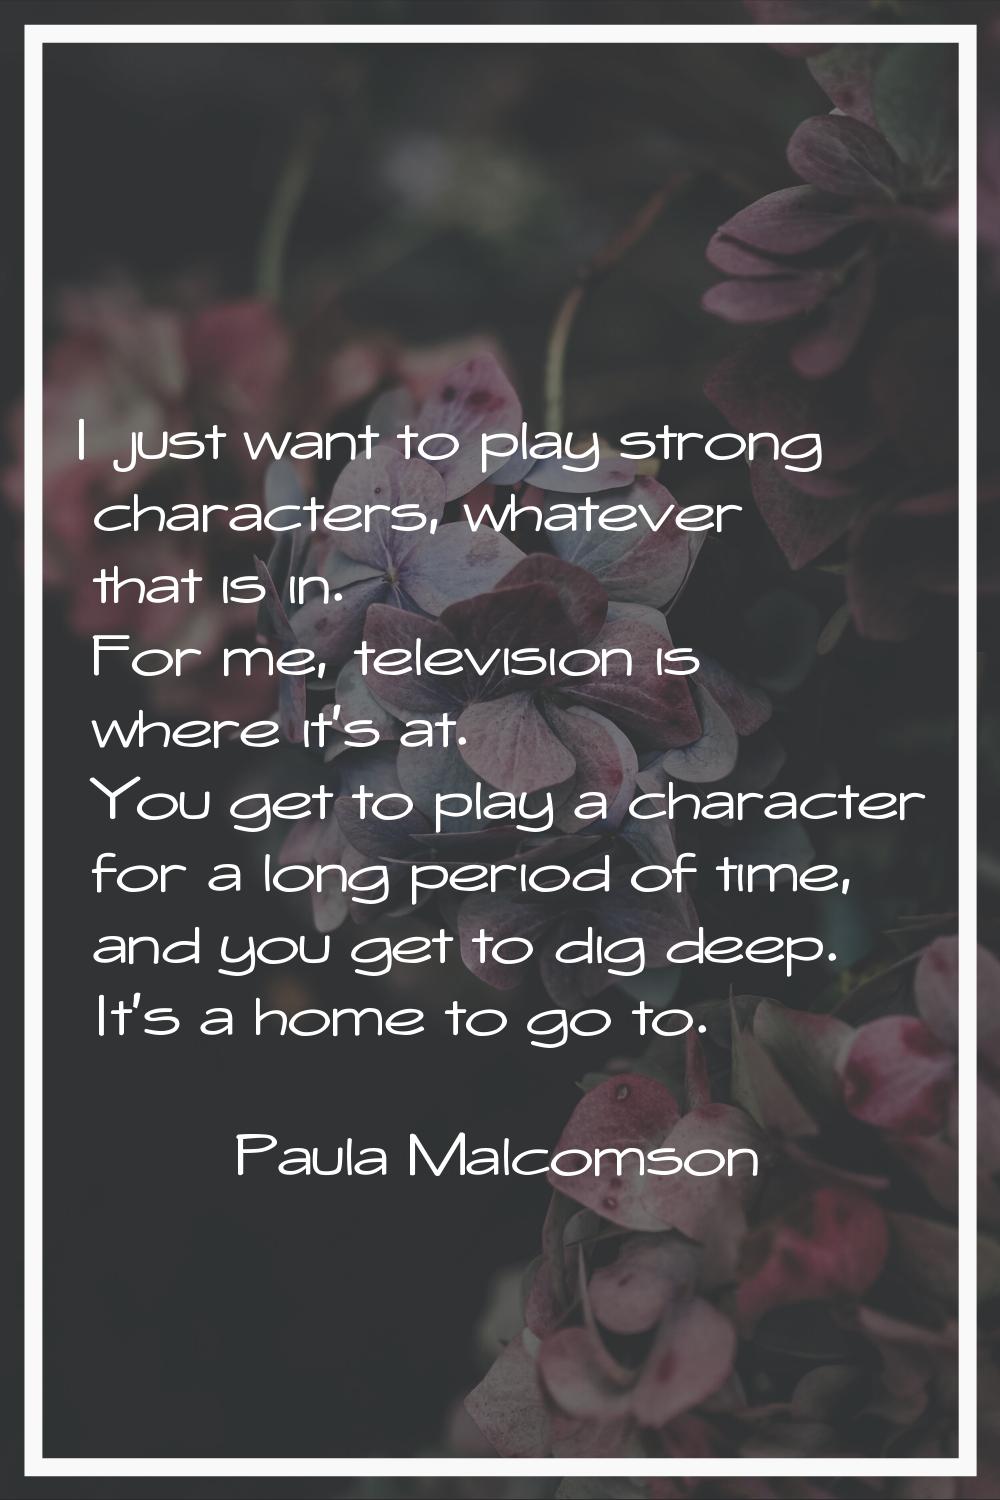 I just want to play strong characters, whatever that is in. For me, television is where it's at. Yo